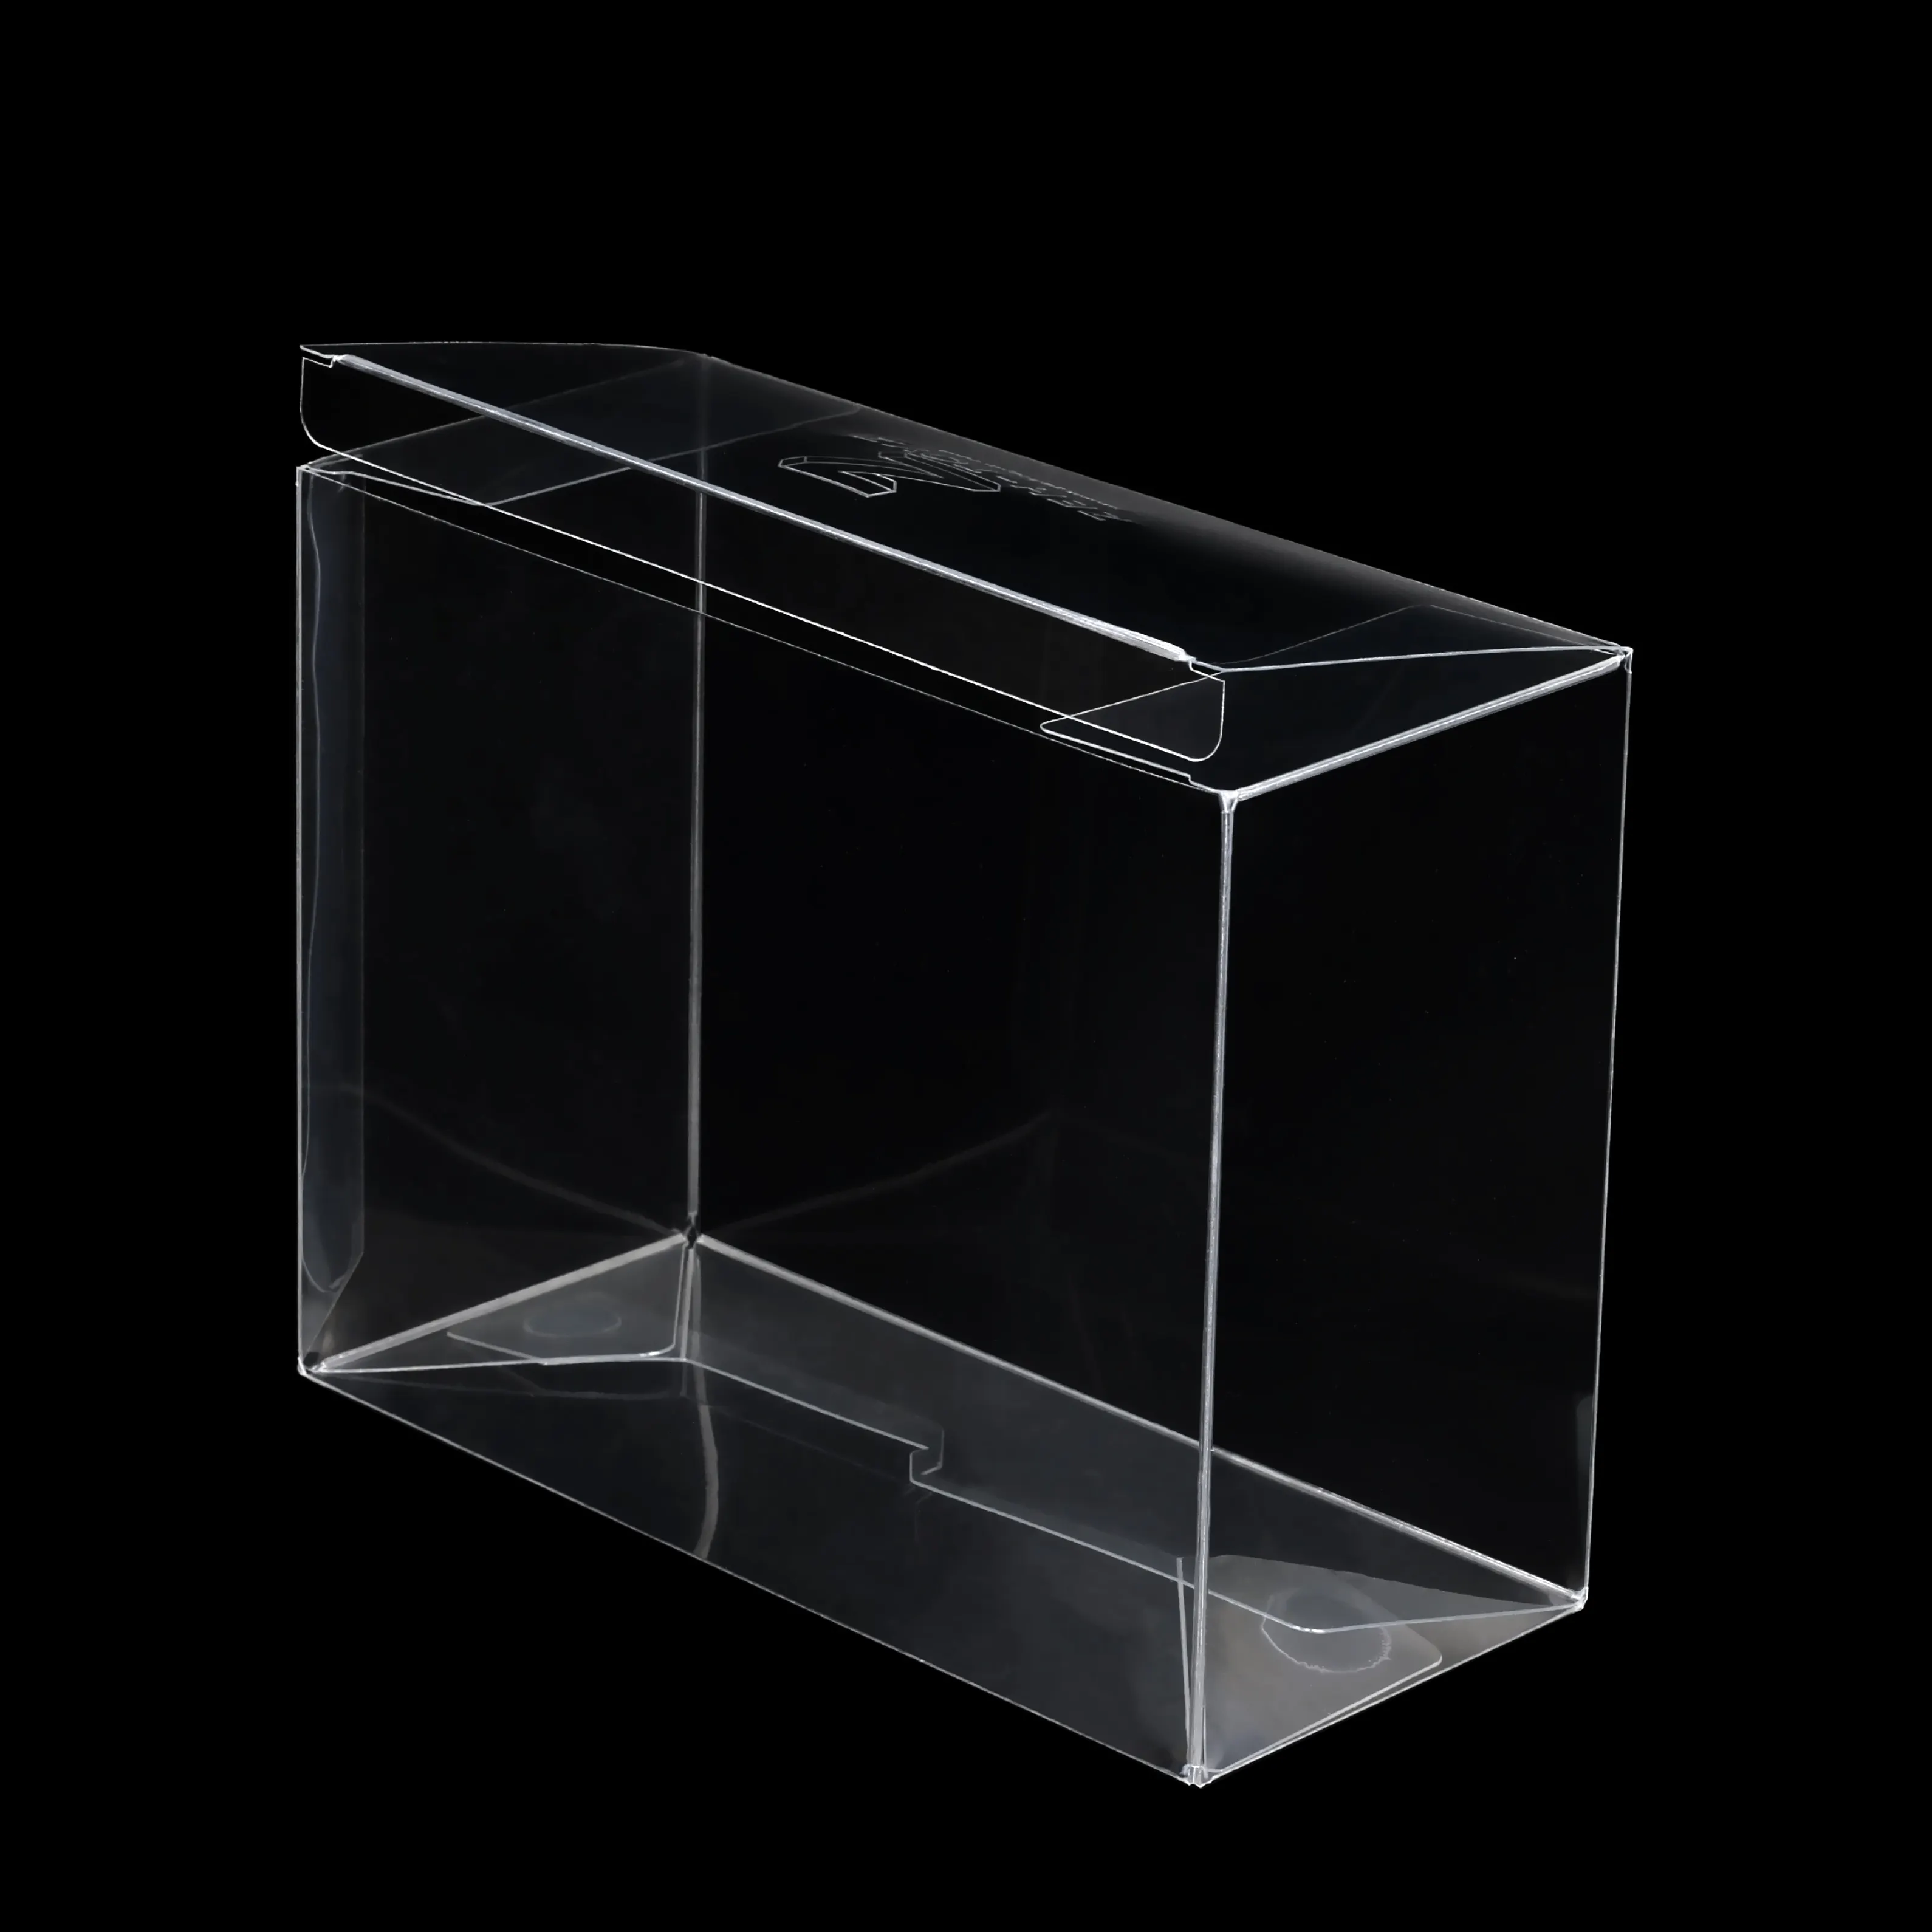 2 Pack Transparent Funko Pop Protector Box 0.5mm Thick Recyclable UV & Scratch Resistant Plastic Display Case with Film Cover